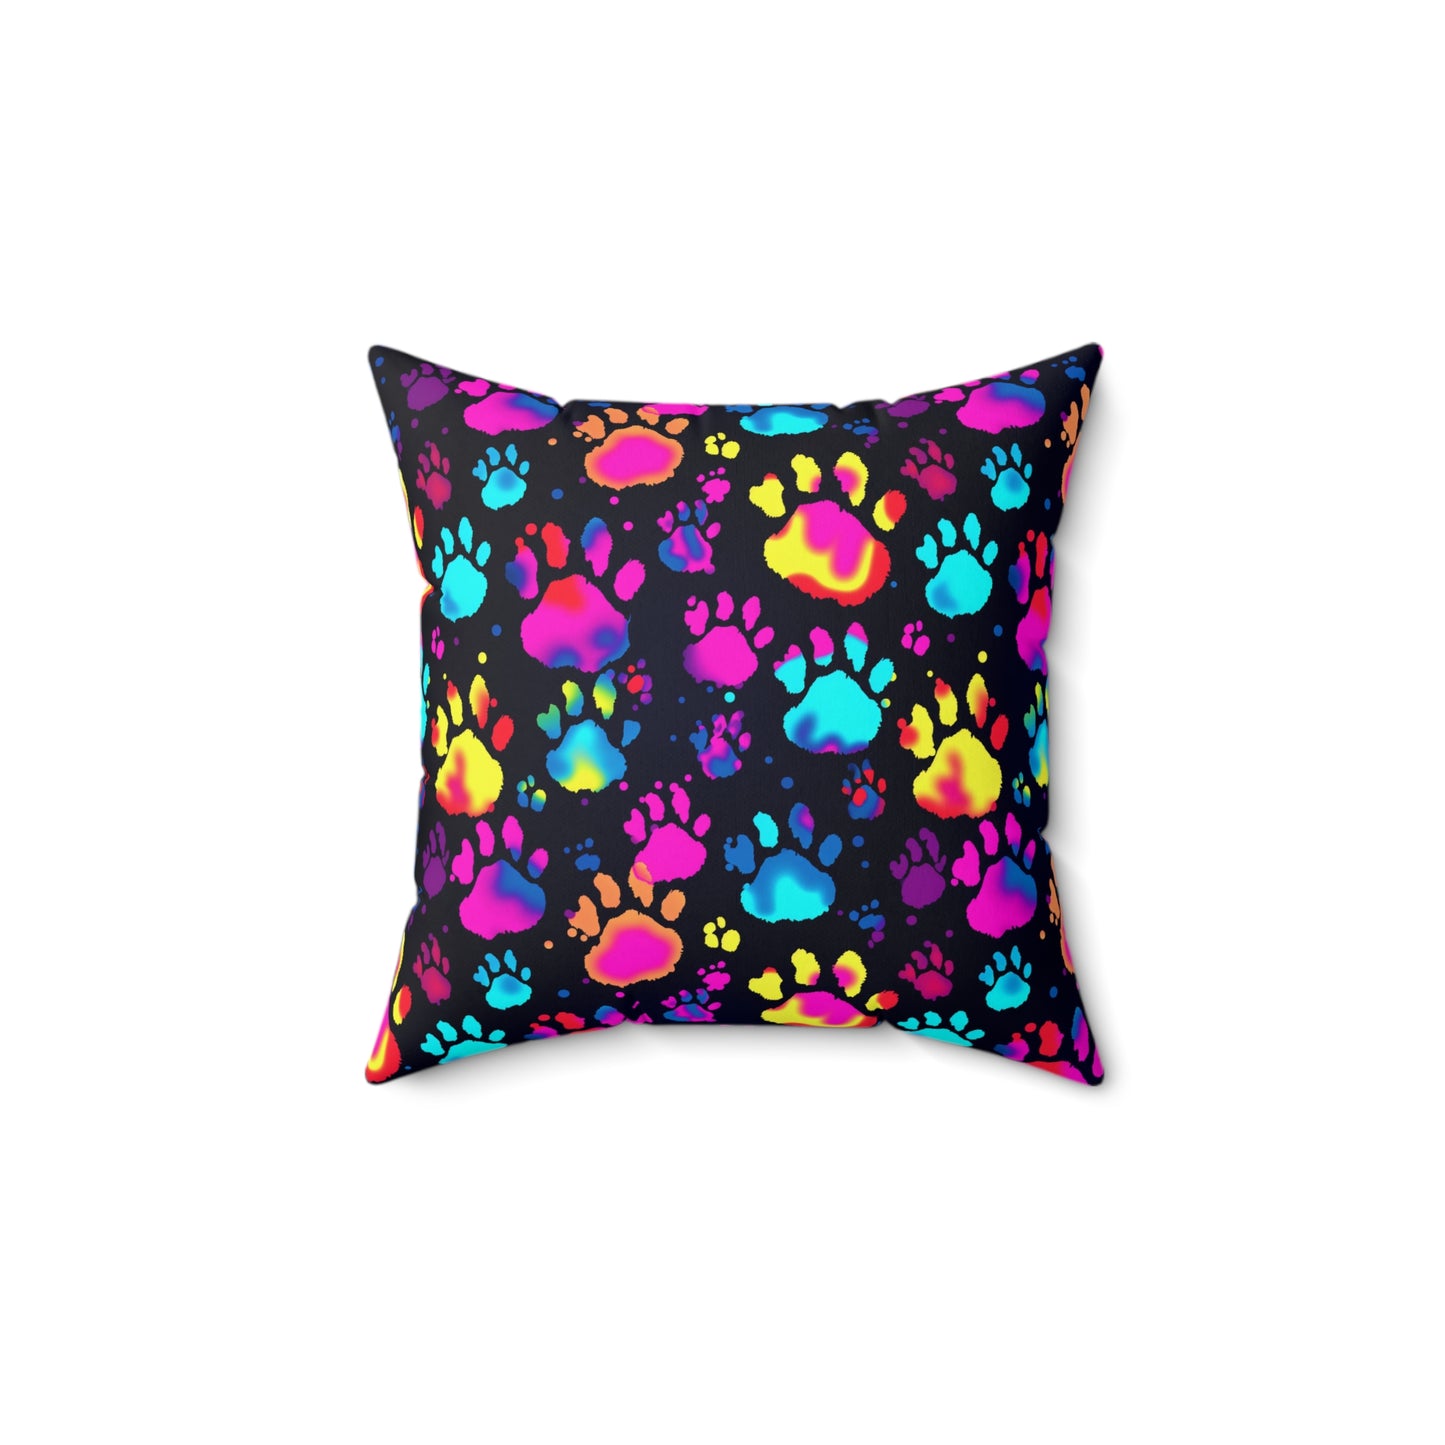 Neon Paw Prints Faux Suede Pillow - Pet-Inspired Decor - Dog Lover Gift - Vibrant Home Accent